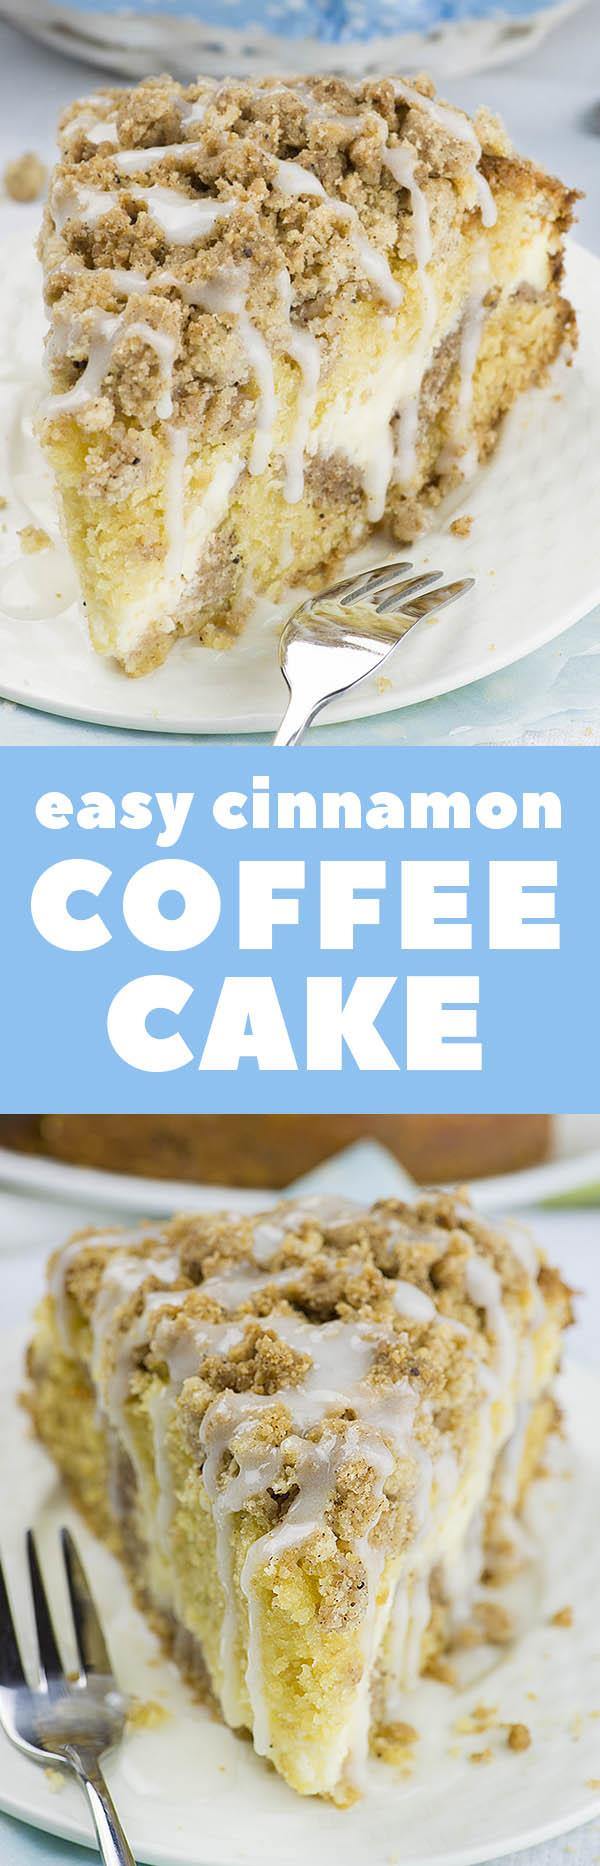 Easy Cinnamon Coffee Cake is simple and quick recipe for delicious, homemade coffee cake from scratch. Dessert or breakfast idea - it's your choice!